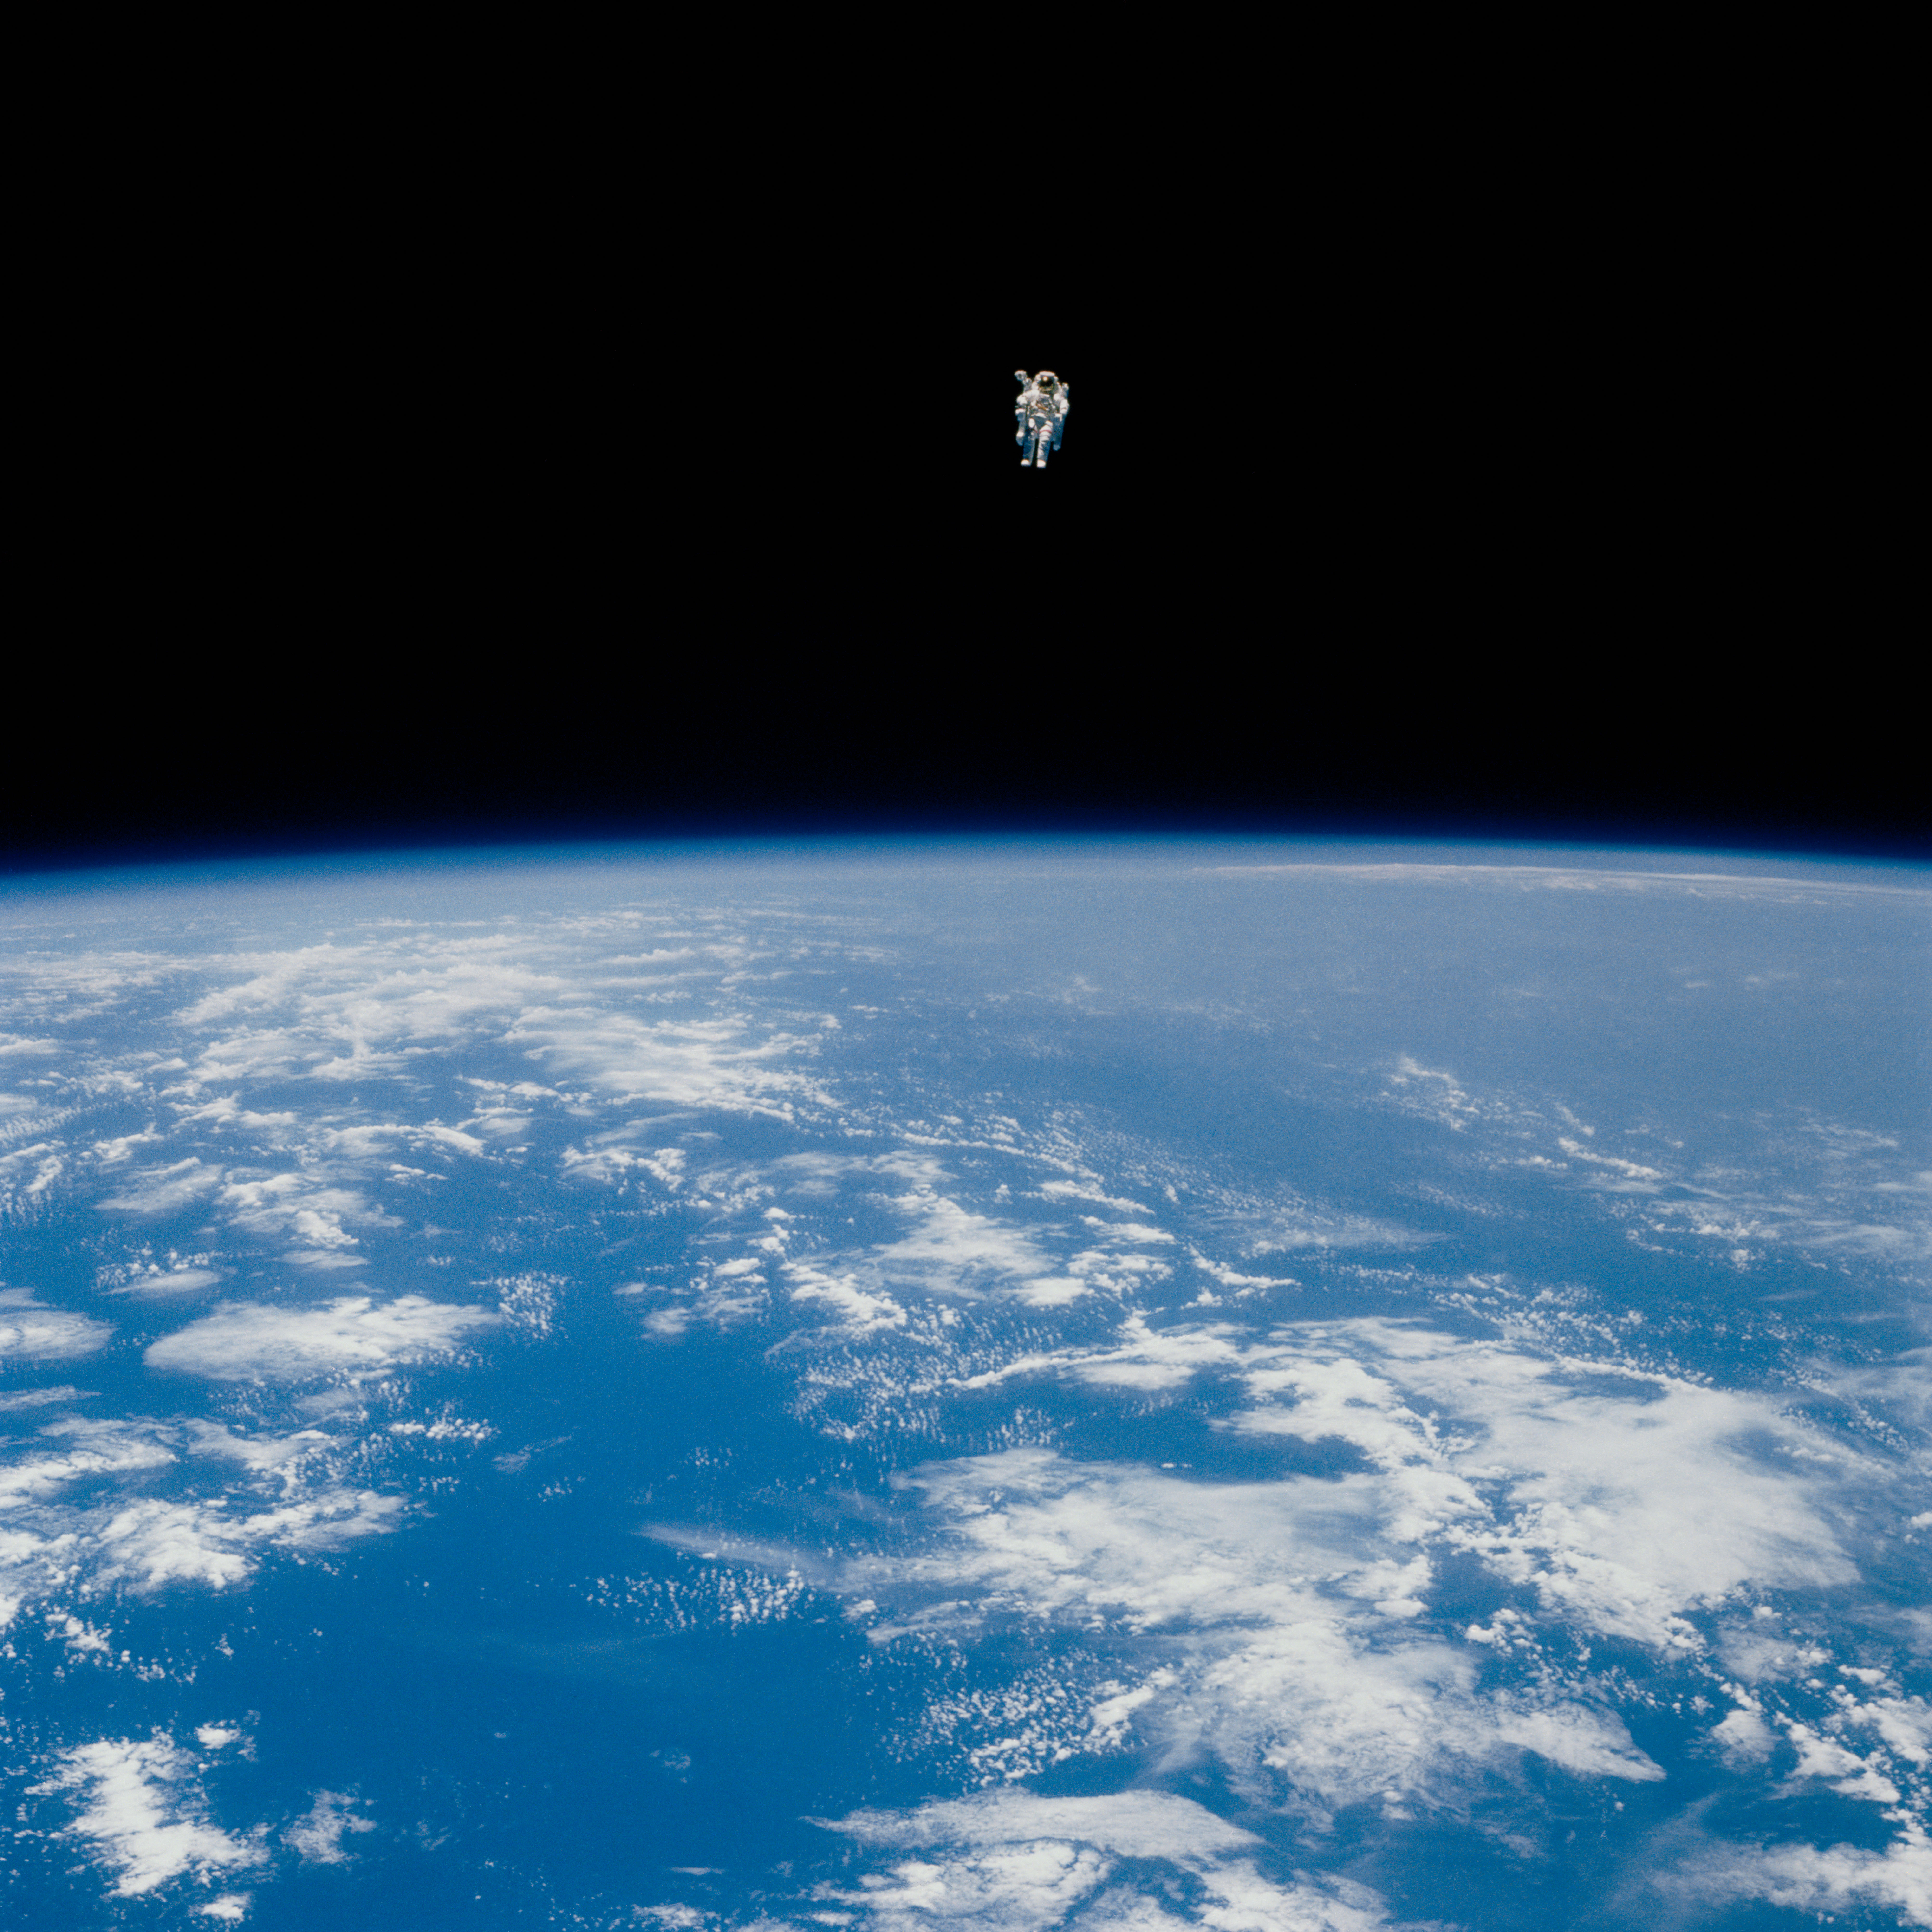 View of Bruce McCandless during the first test flight of the Manned Maneuvering Unit